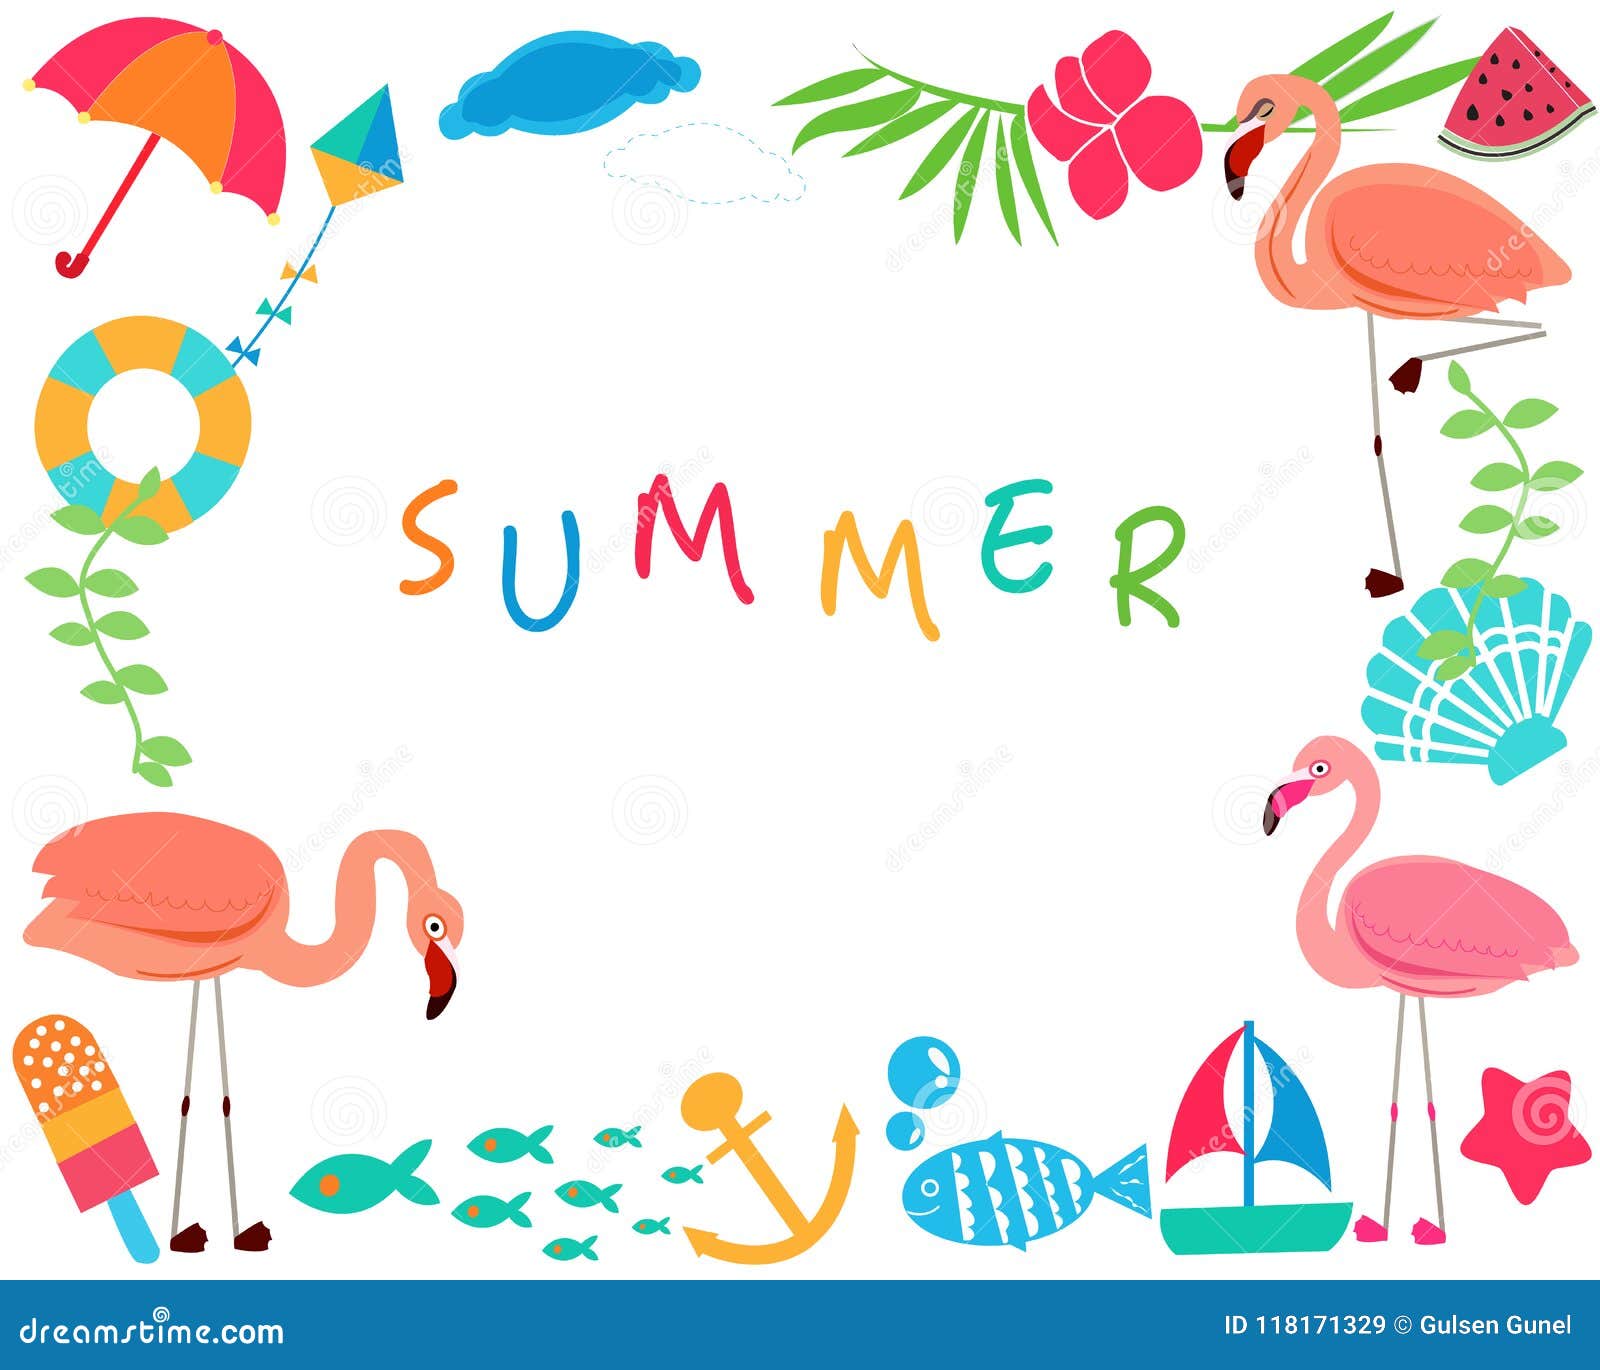 Download Flamingo With Tropical Summer Colorful Summer Icon Frame Stock Vector Illustration of party